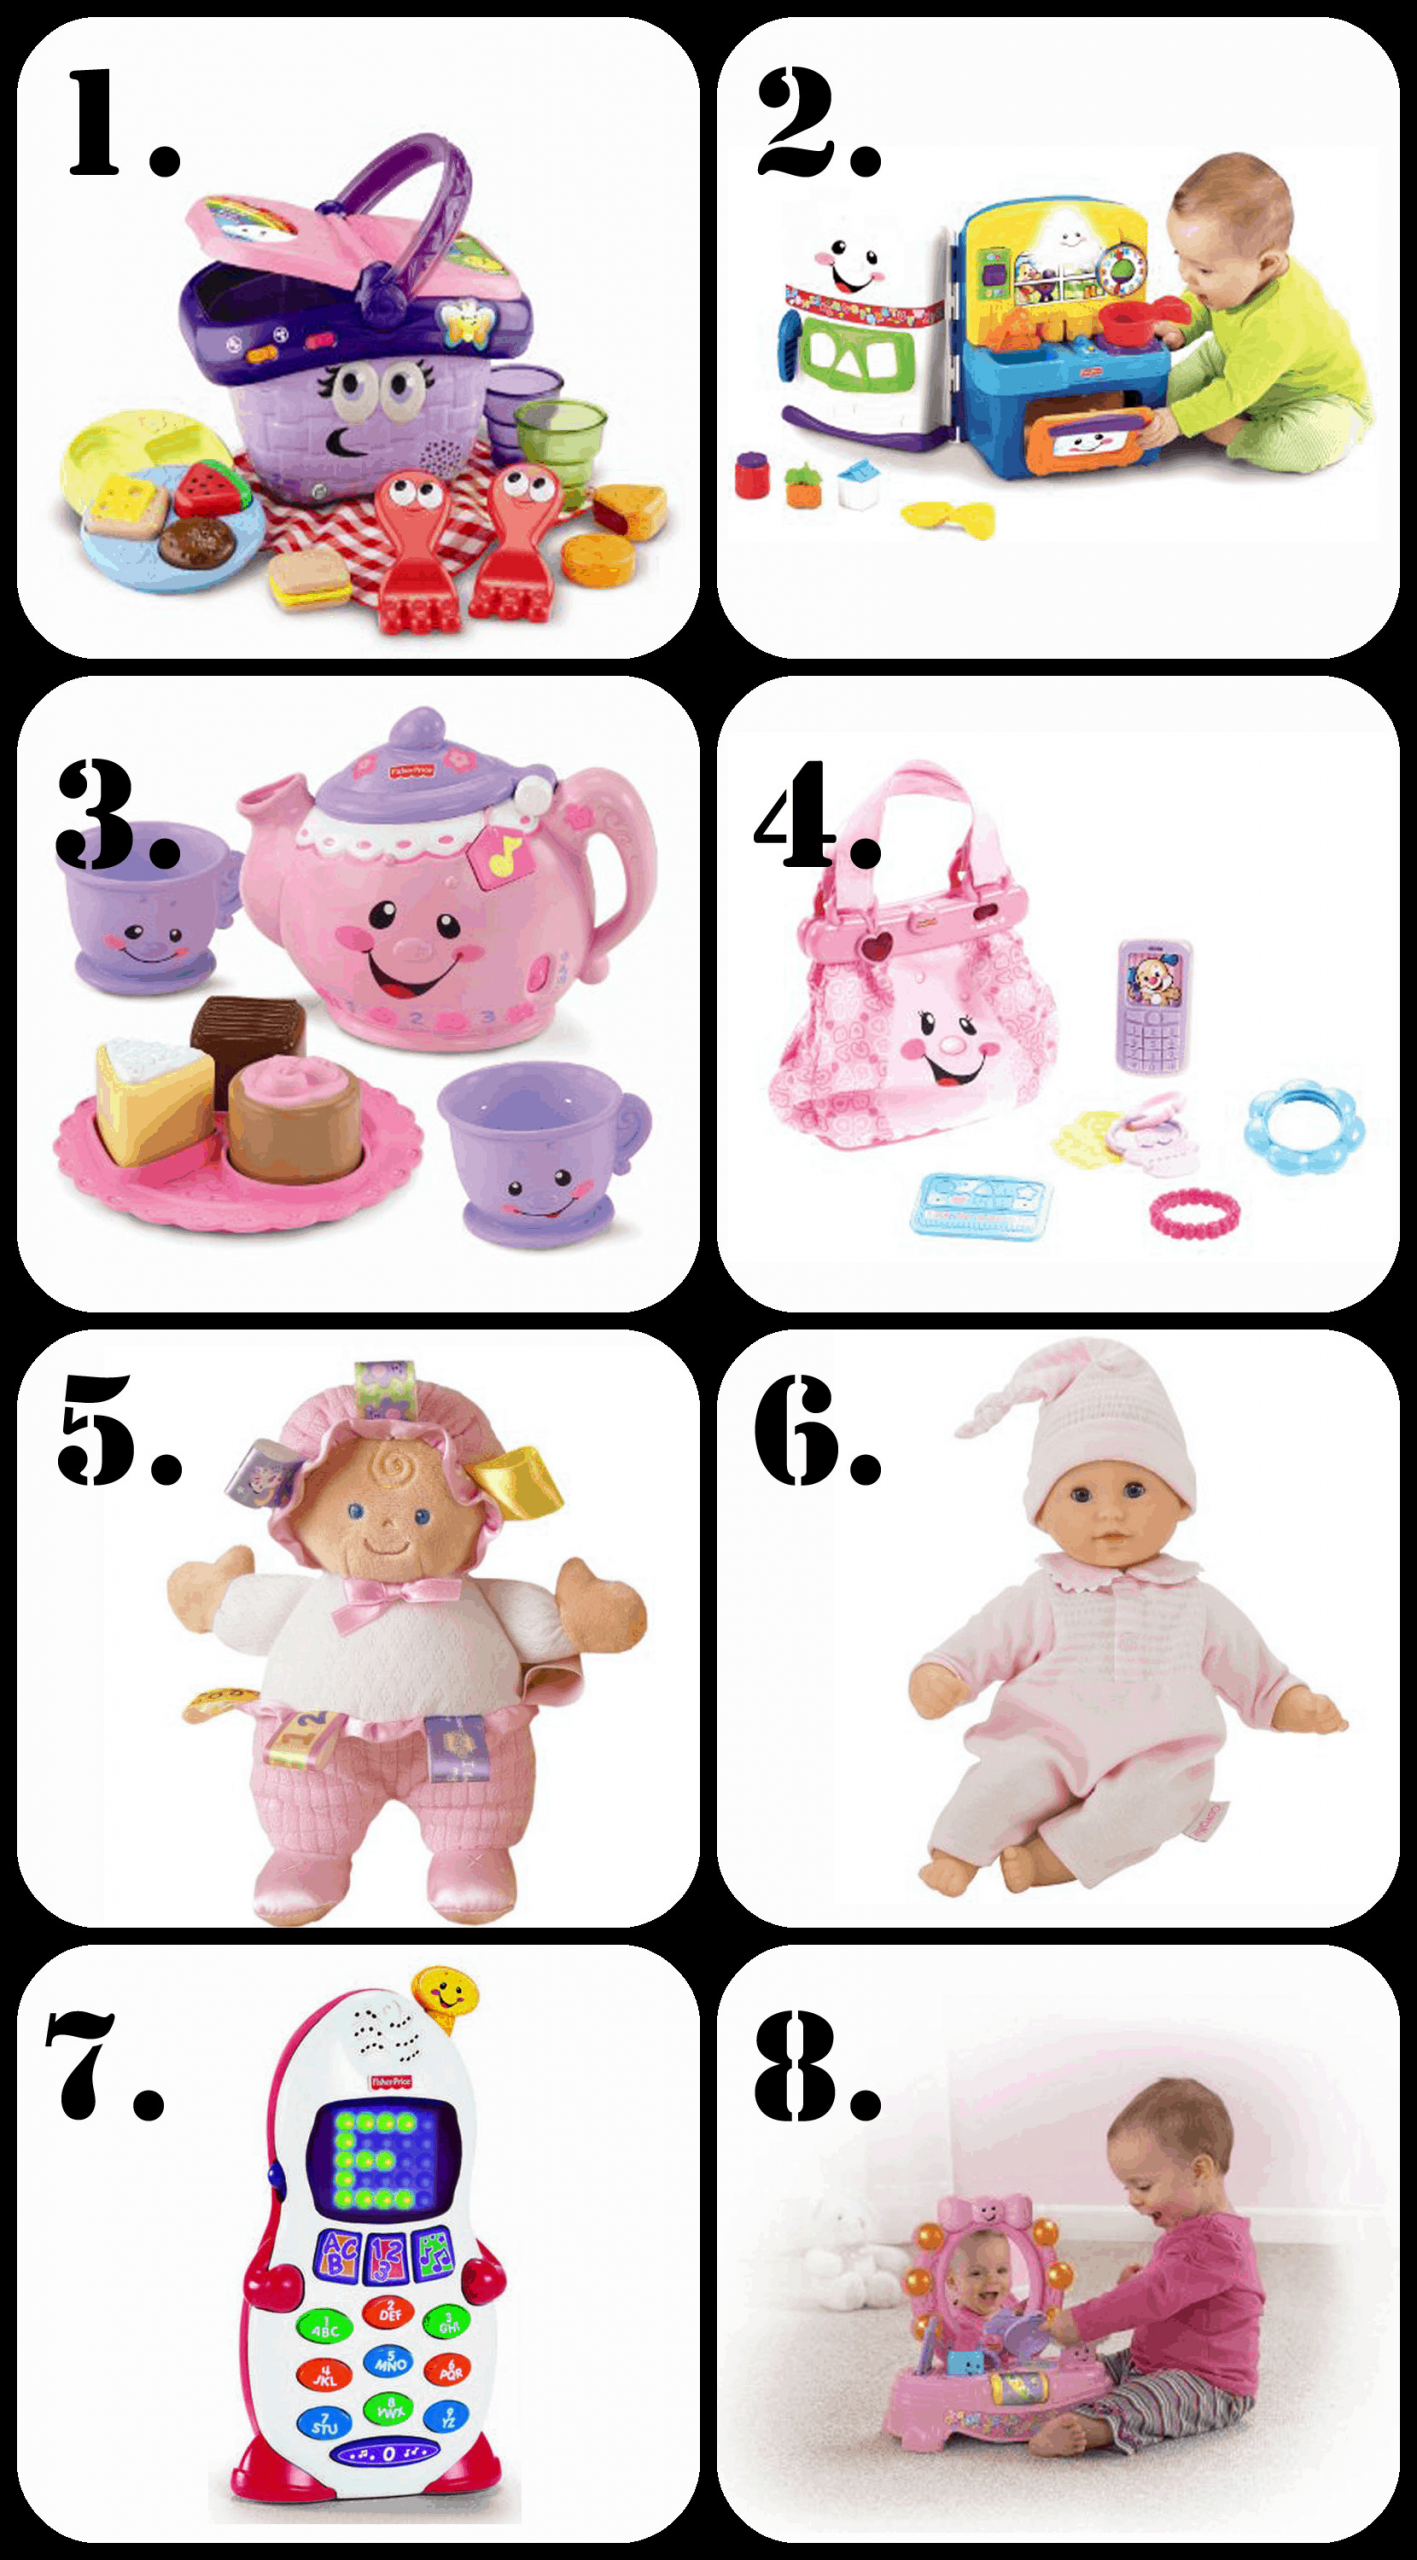 Best Gift Ideas For 1 Year Old Baby Girl
 The Ultimate List of Gift Ideas for a 1 Year Old Girl